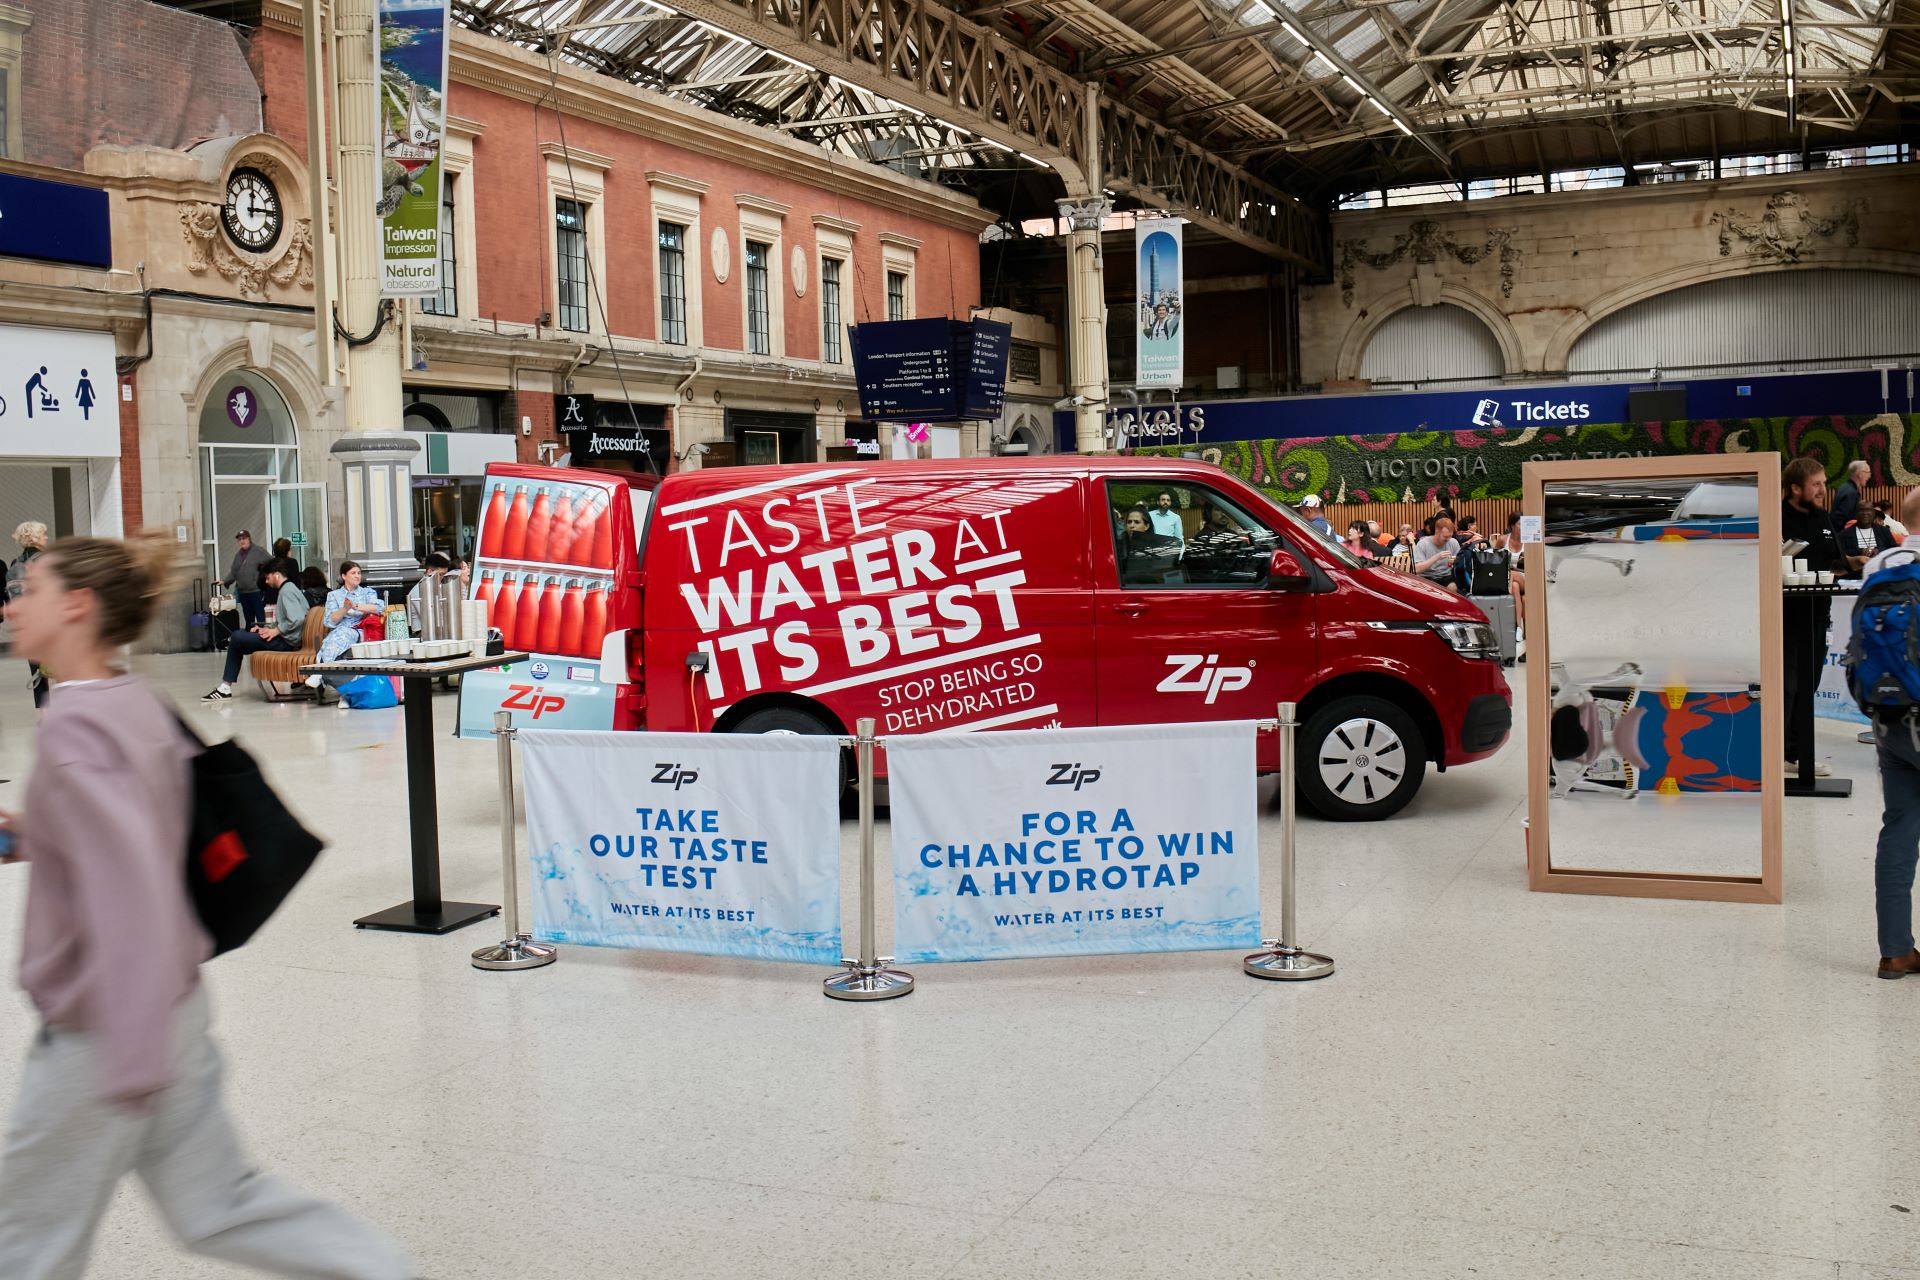 Zip Water at Victoria station